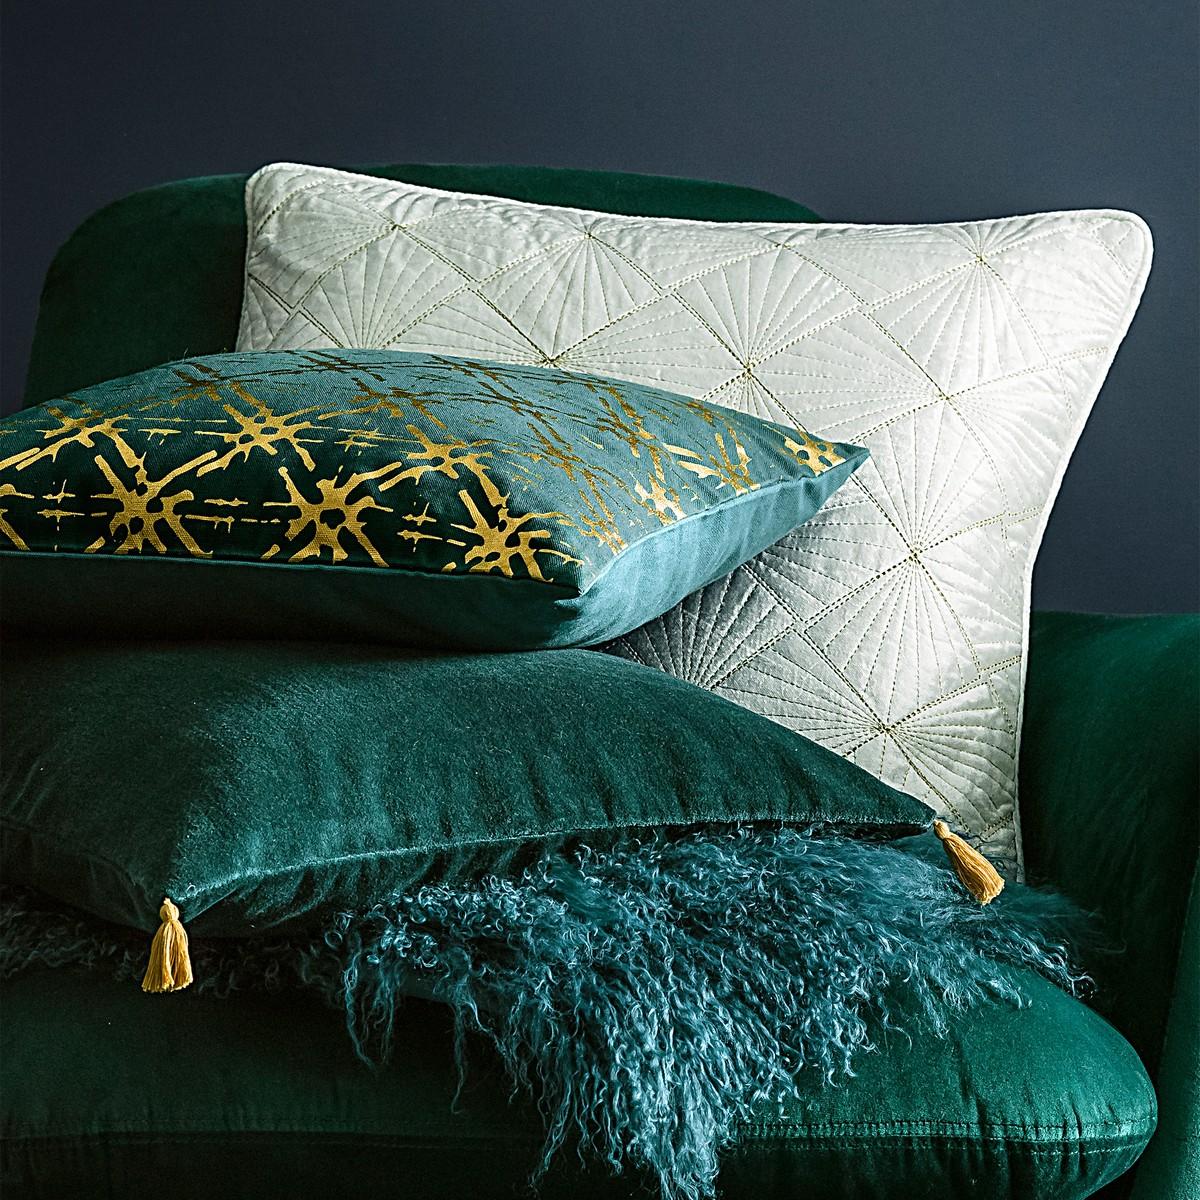 Green and gold velvet and silver cushions - home accessories inspiration| This is how to do mixed metals! Today we're talking inspiration for adding green to your living room. Green is a really versatile colour to decorate your home with. But, which colours and tones work well? What kind of accessories work with green? This post gives you ideas for pulling together an elegant green colour palette and pieces for your home. Read more: kittyandb.com #greenlivingroom #greenaccessories #greencolorpalette #mixedmetals #interiordecoratinginspiration #greenaesthetic #greenandgold #cushions